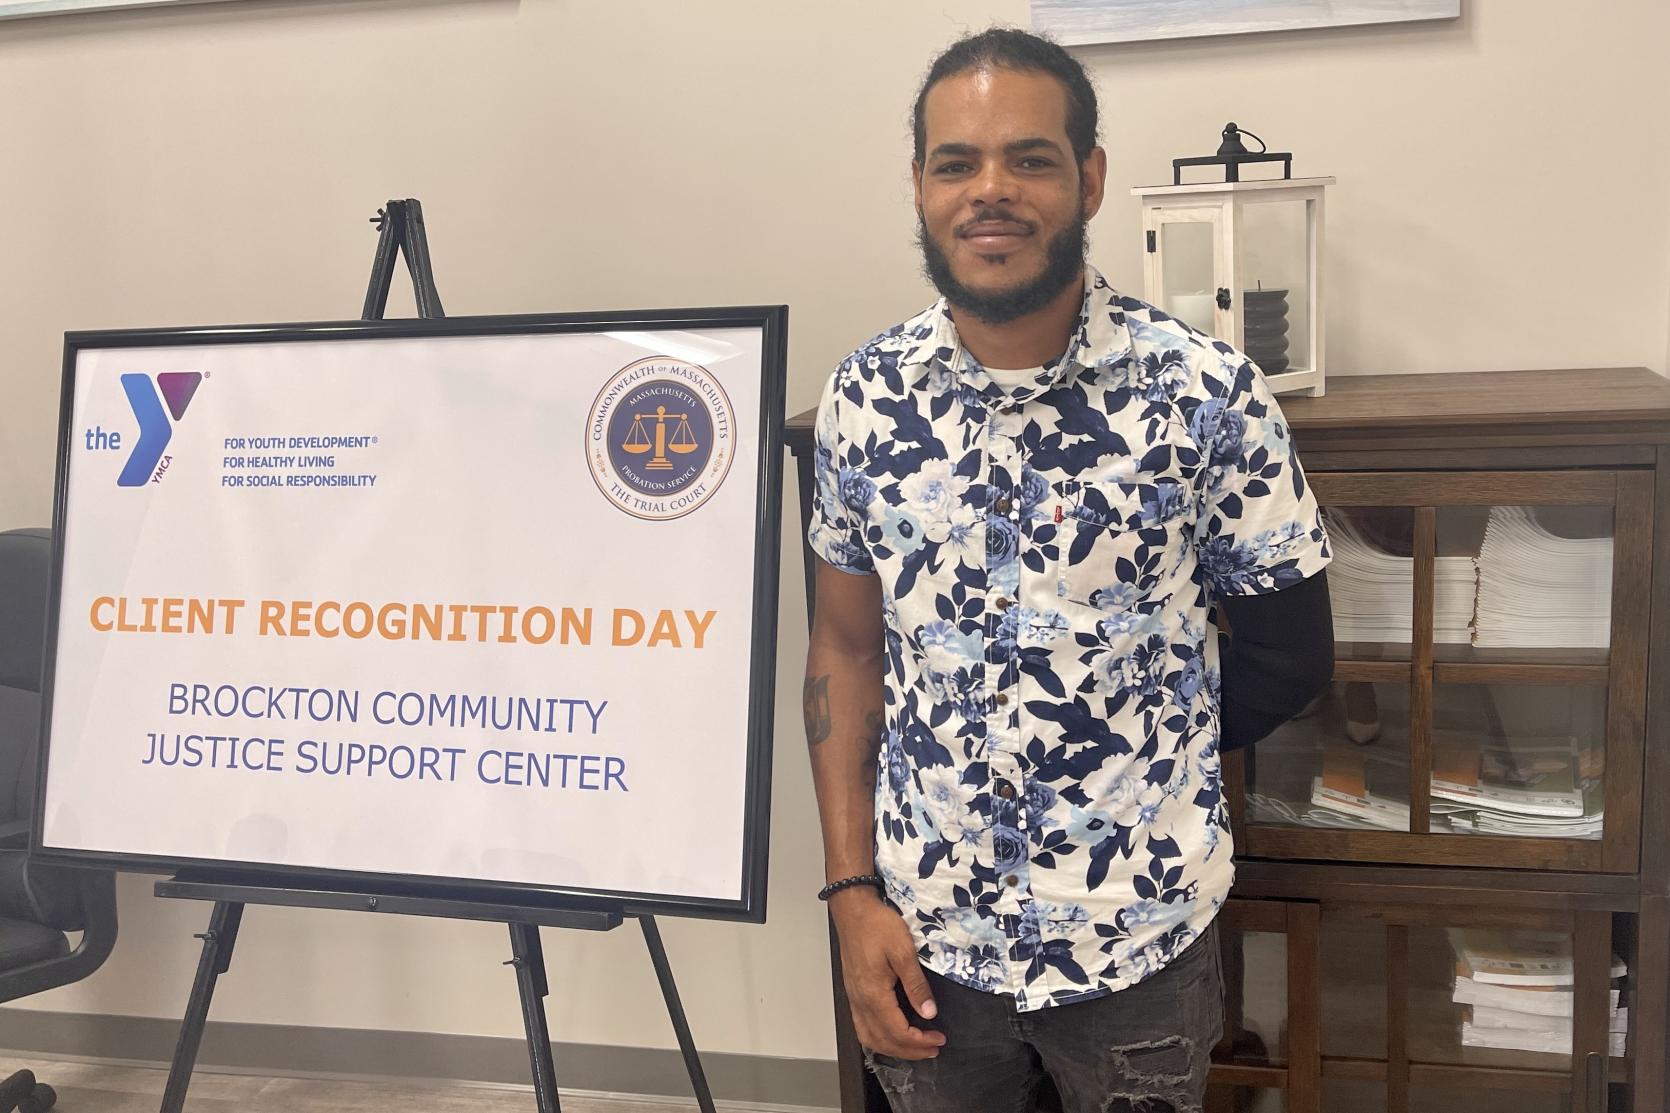 Joao DePina attending an MPS client recognition day at the Brockton Community Justice Support Center. 